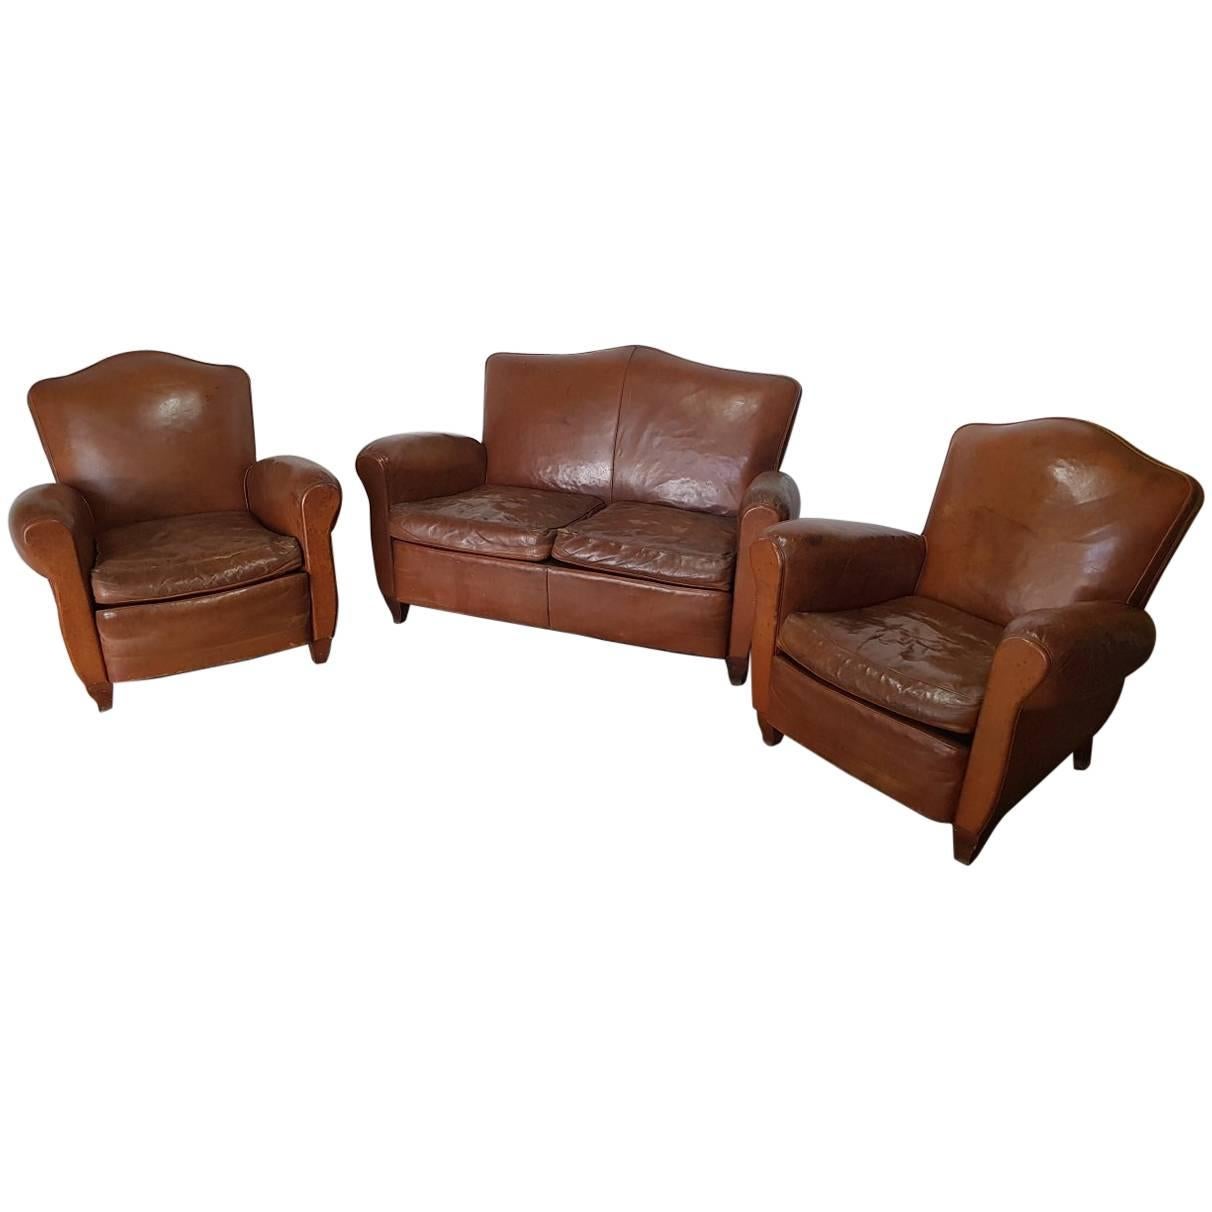 Vintage French Leather Club Chairs with Matching Sofa from the 1950s